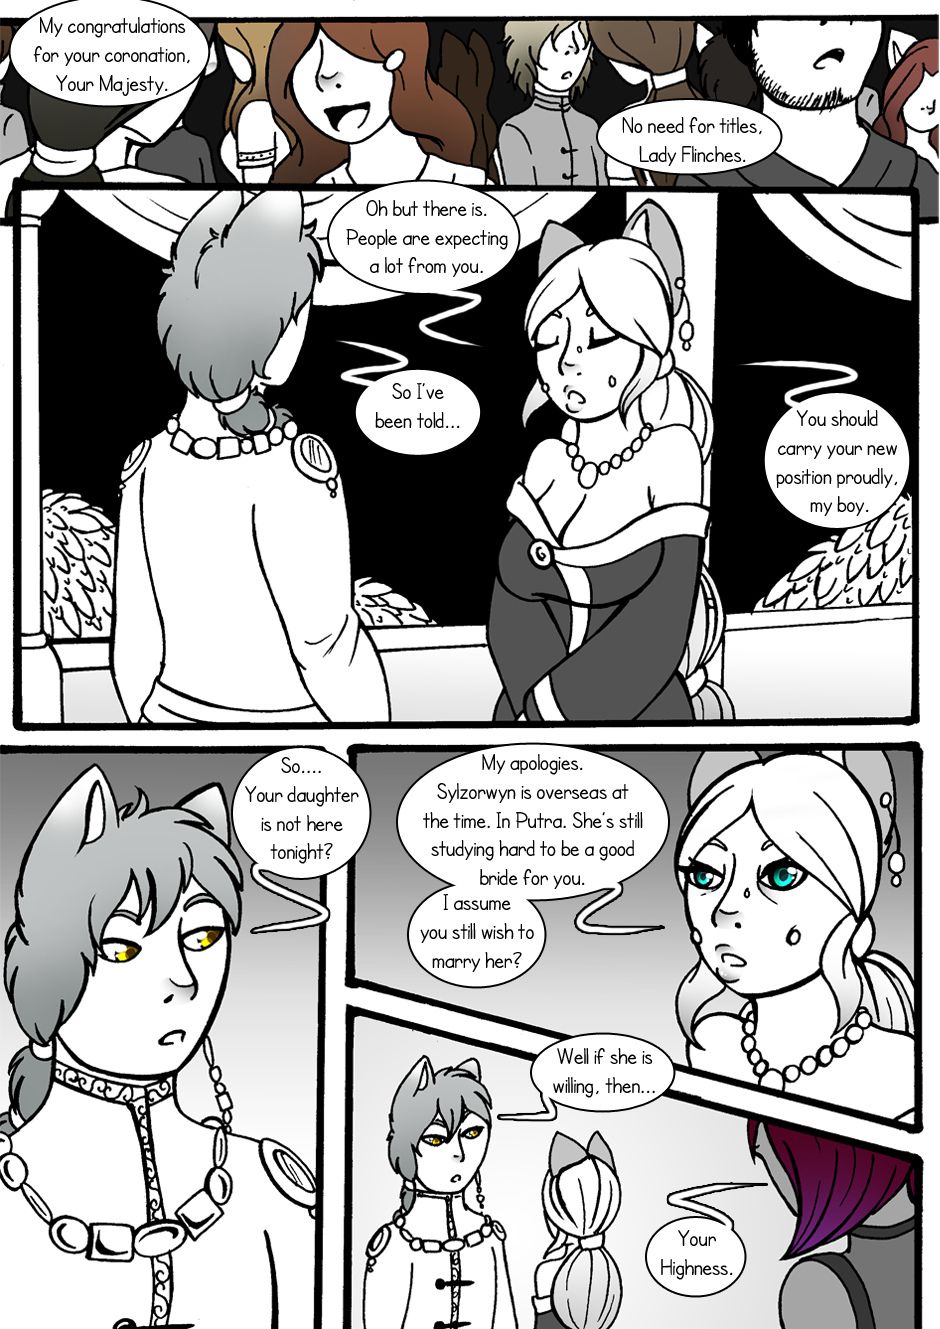 [Jeny-jen94]Between Kings and Queens[ongoing] 23